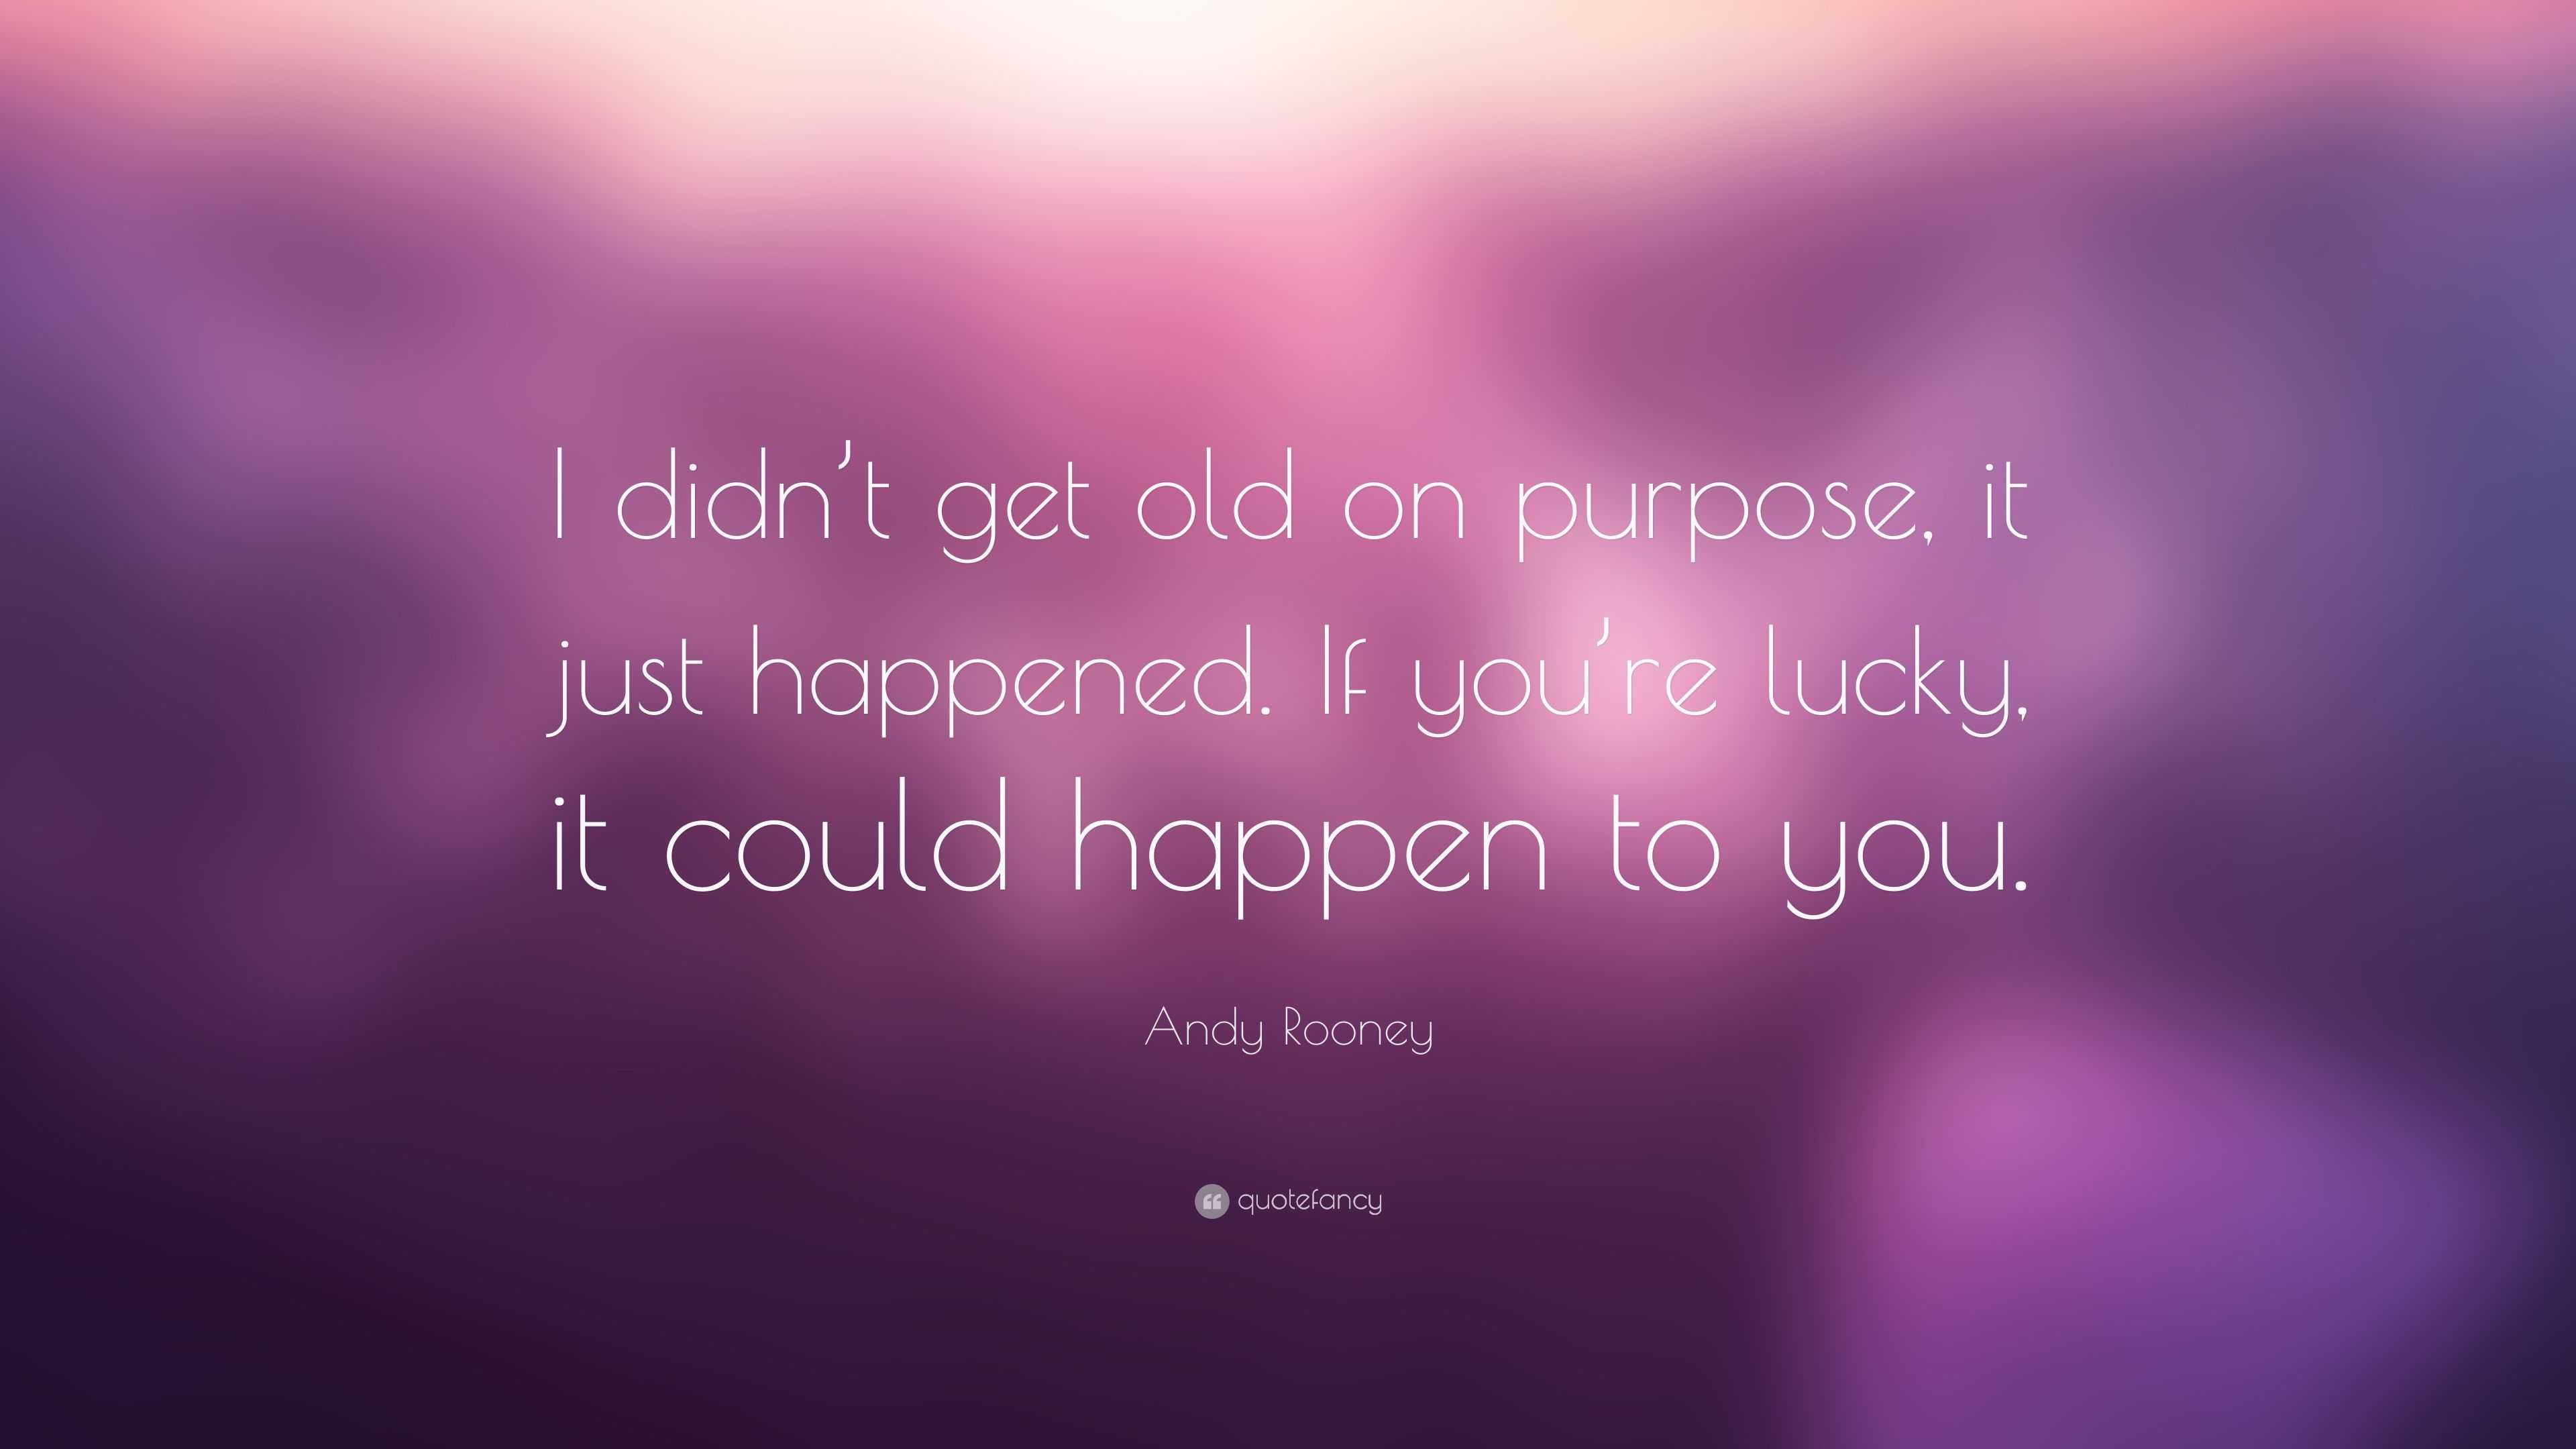 famous quotes by andy rooney